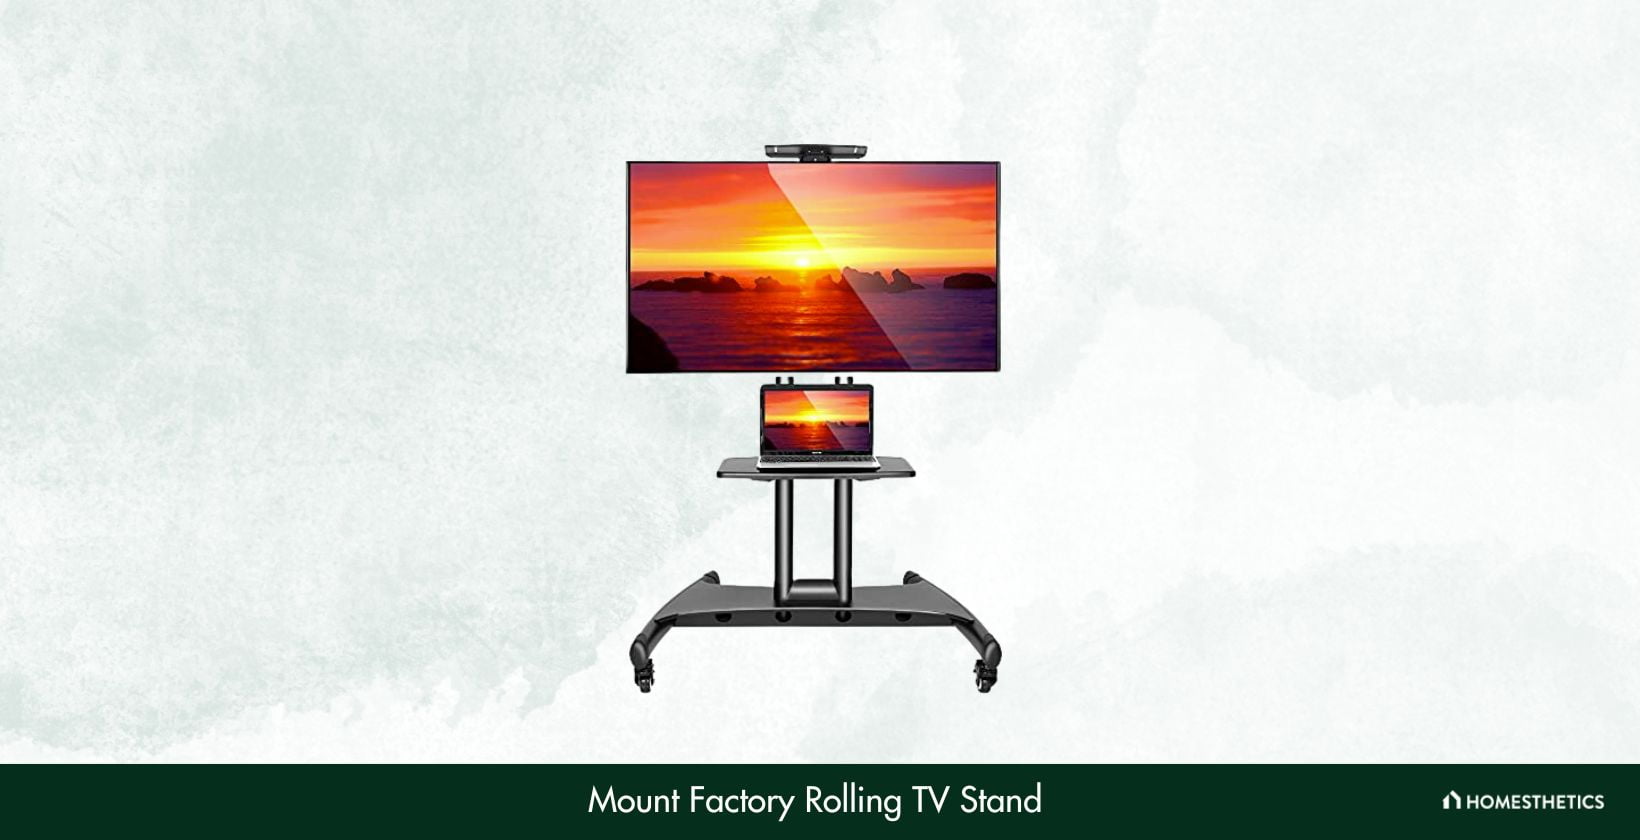 Mount Factory Rolling TV Stand Mobile TV Cart